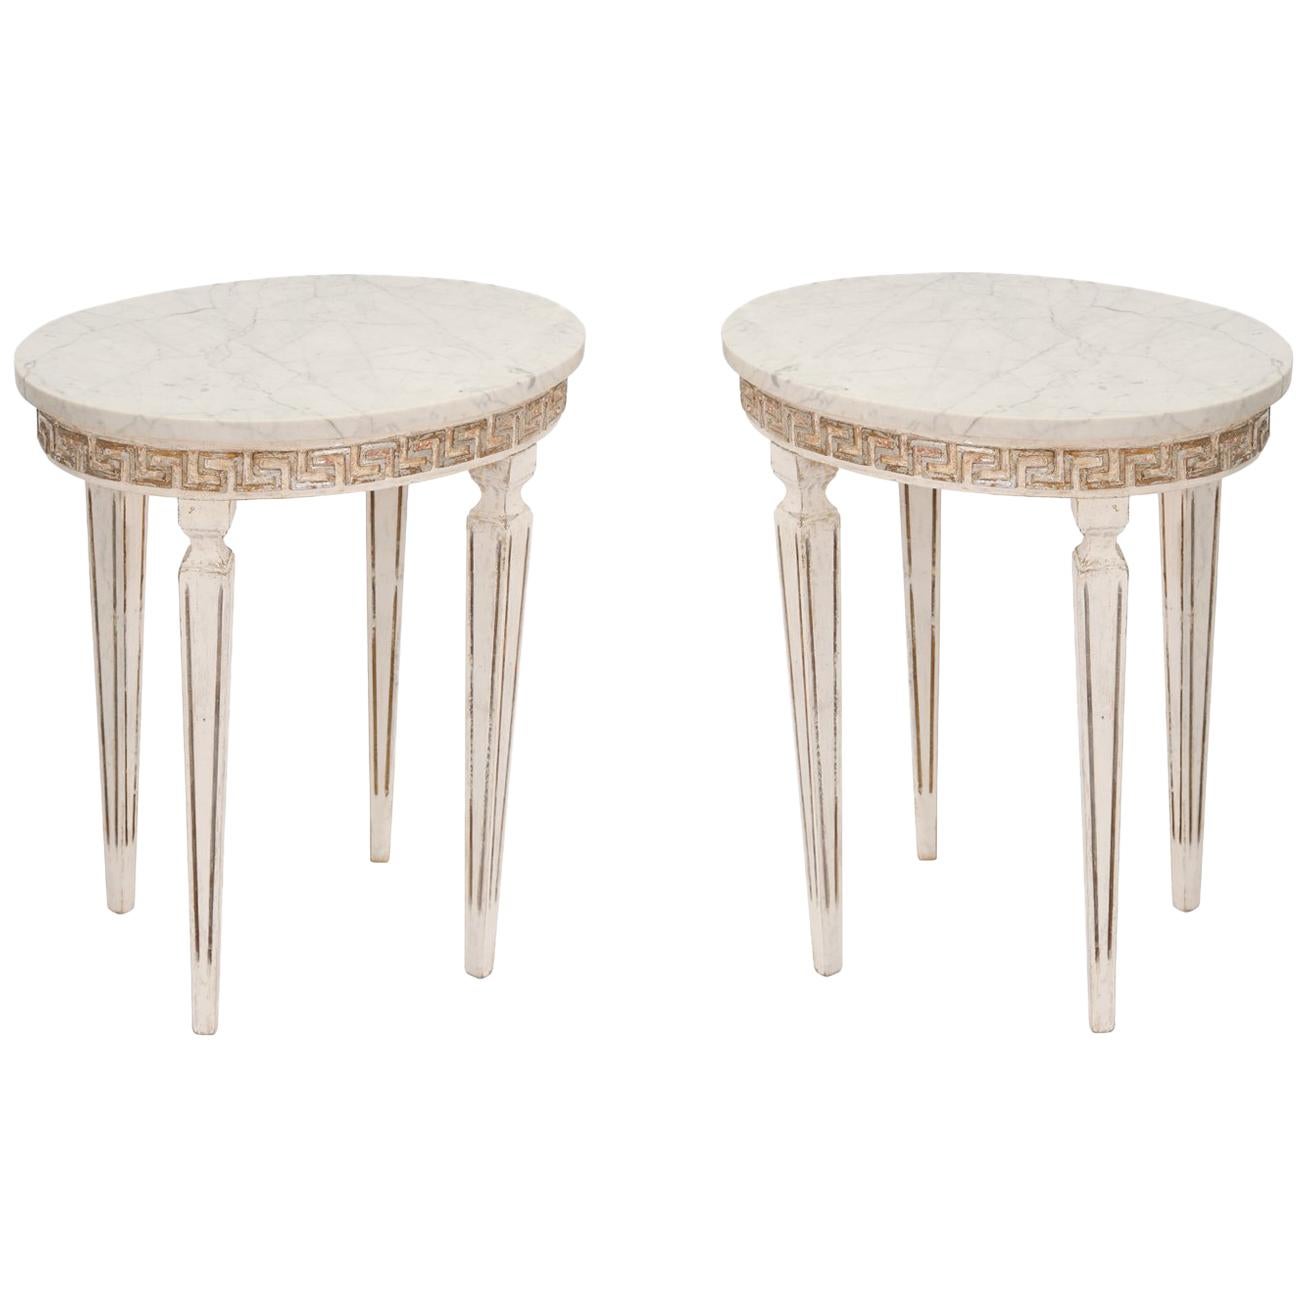 Pair of Marble-Top Italian Accent Tables with Greek Key Apron